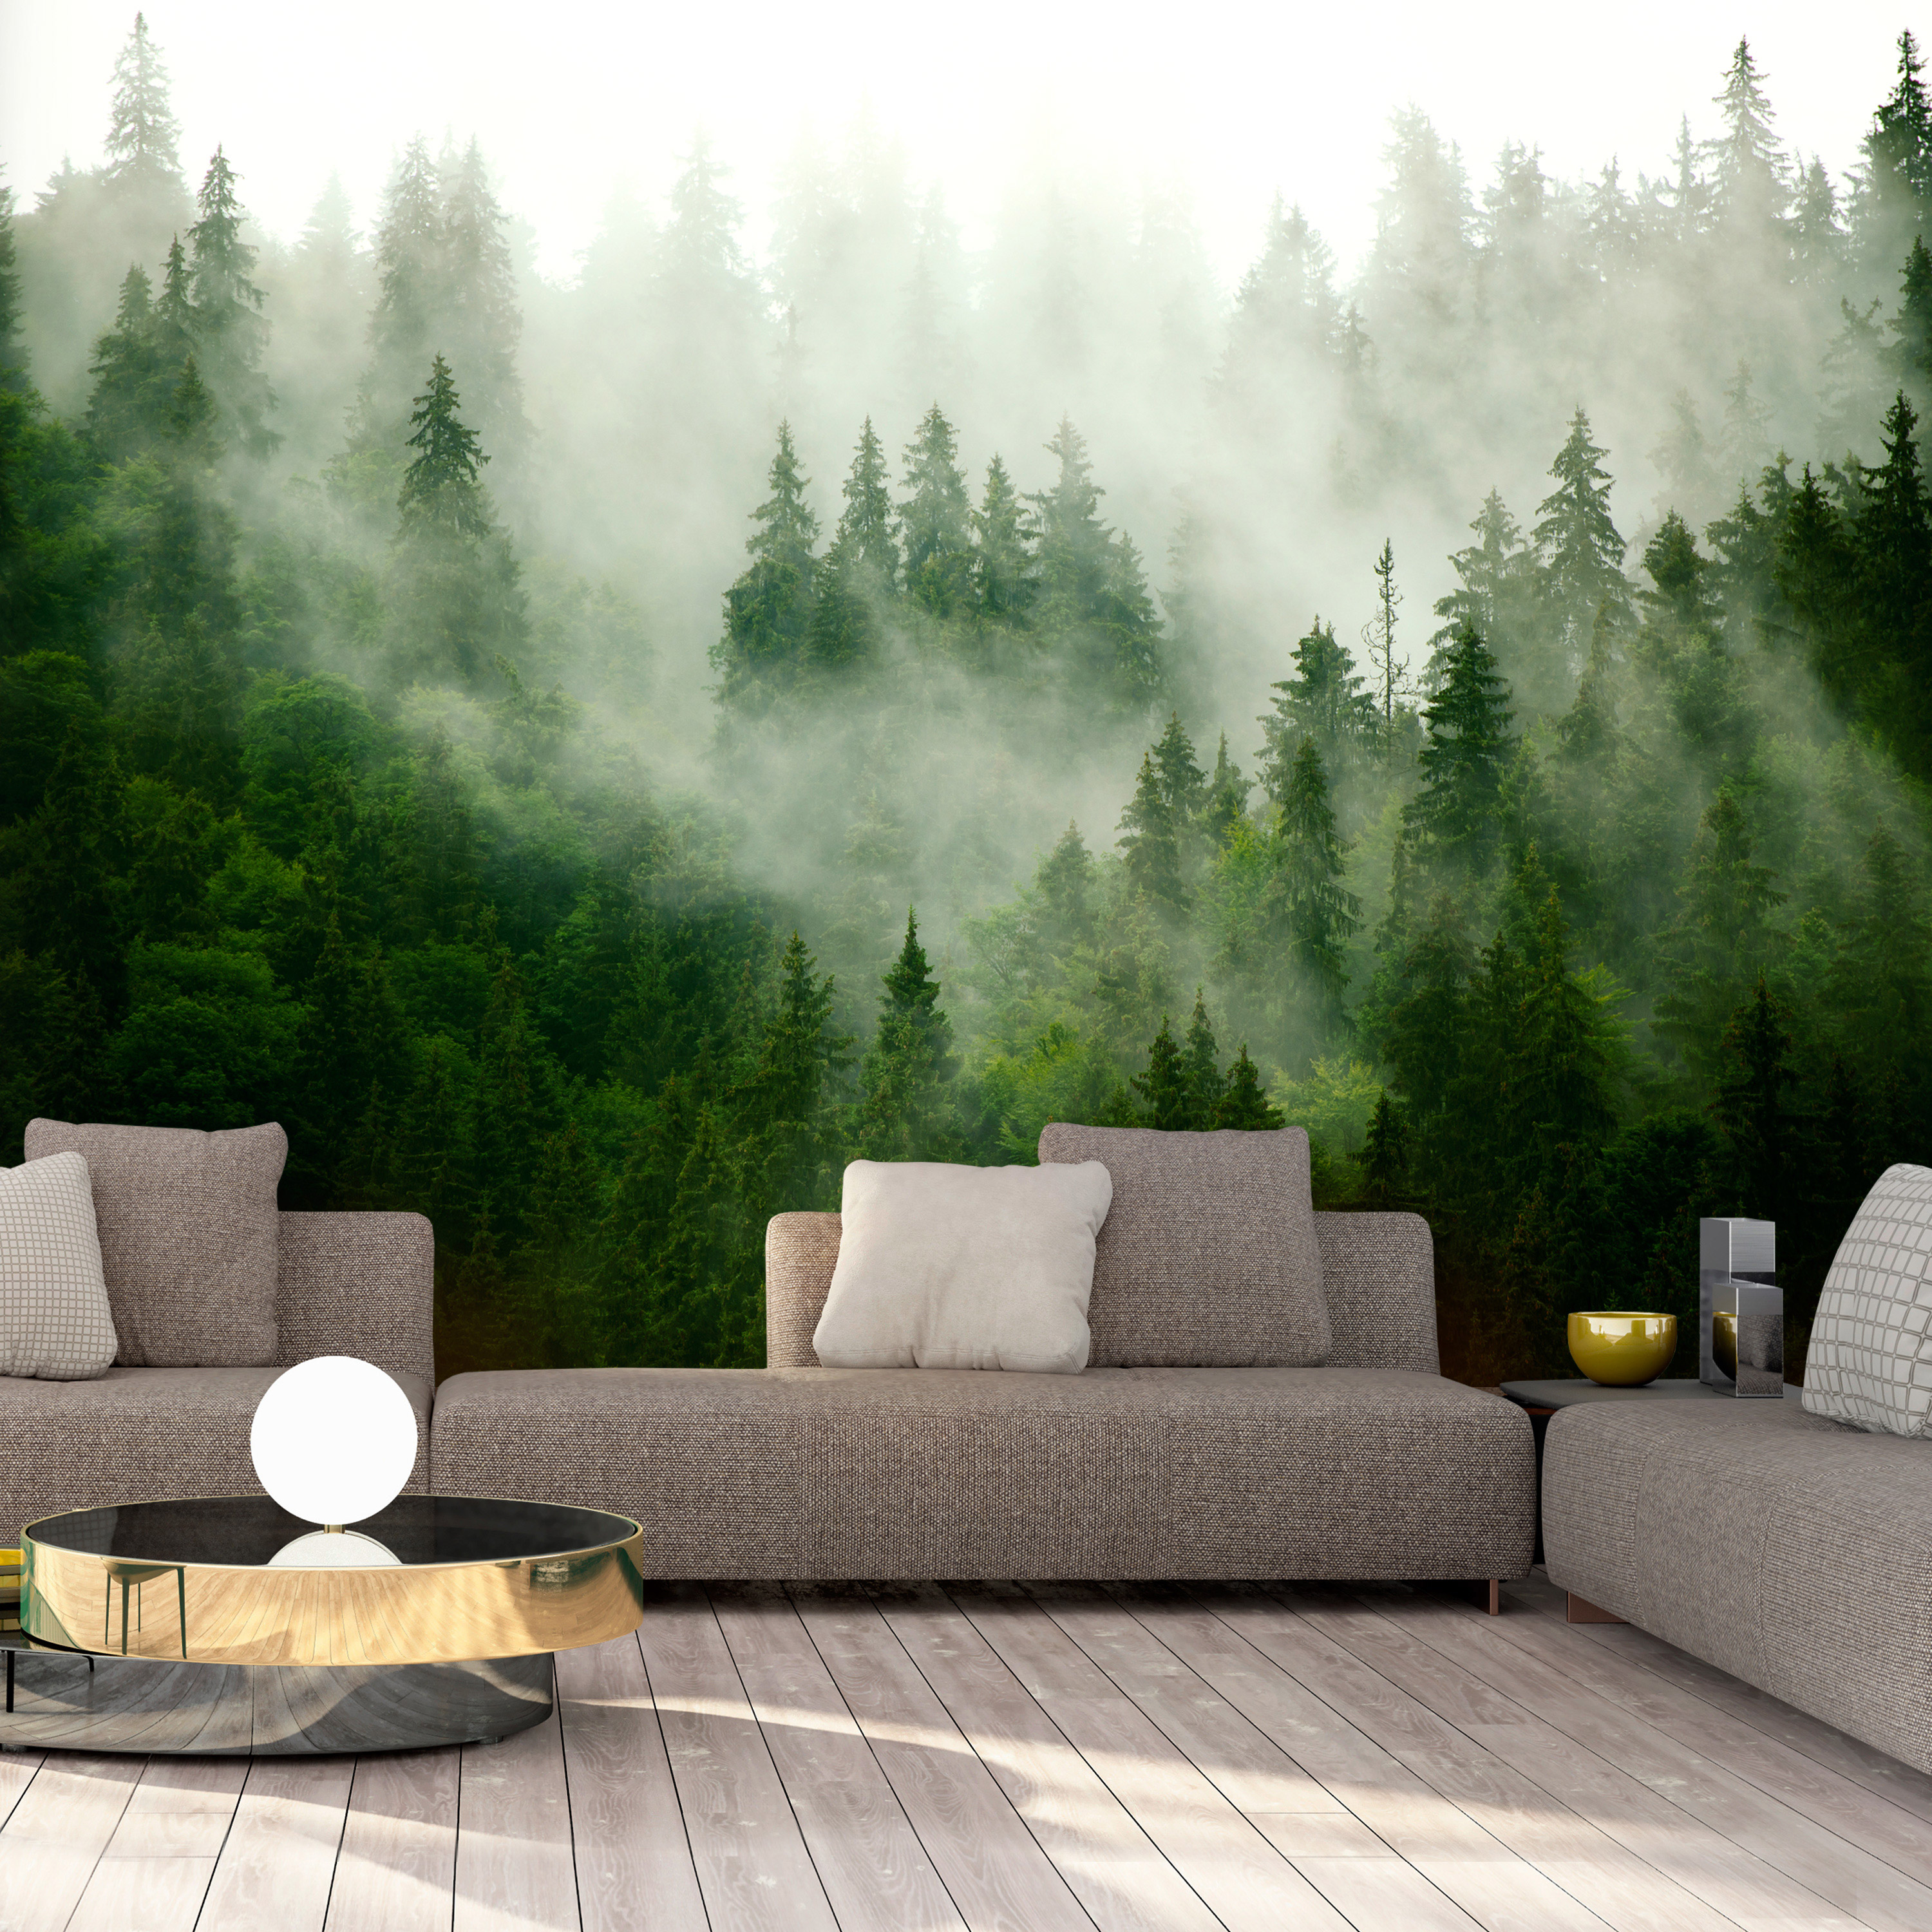 Self-adhesive Wallpaper - Mountain Forest (Green) - 98x70